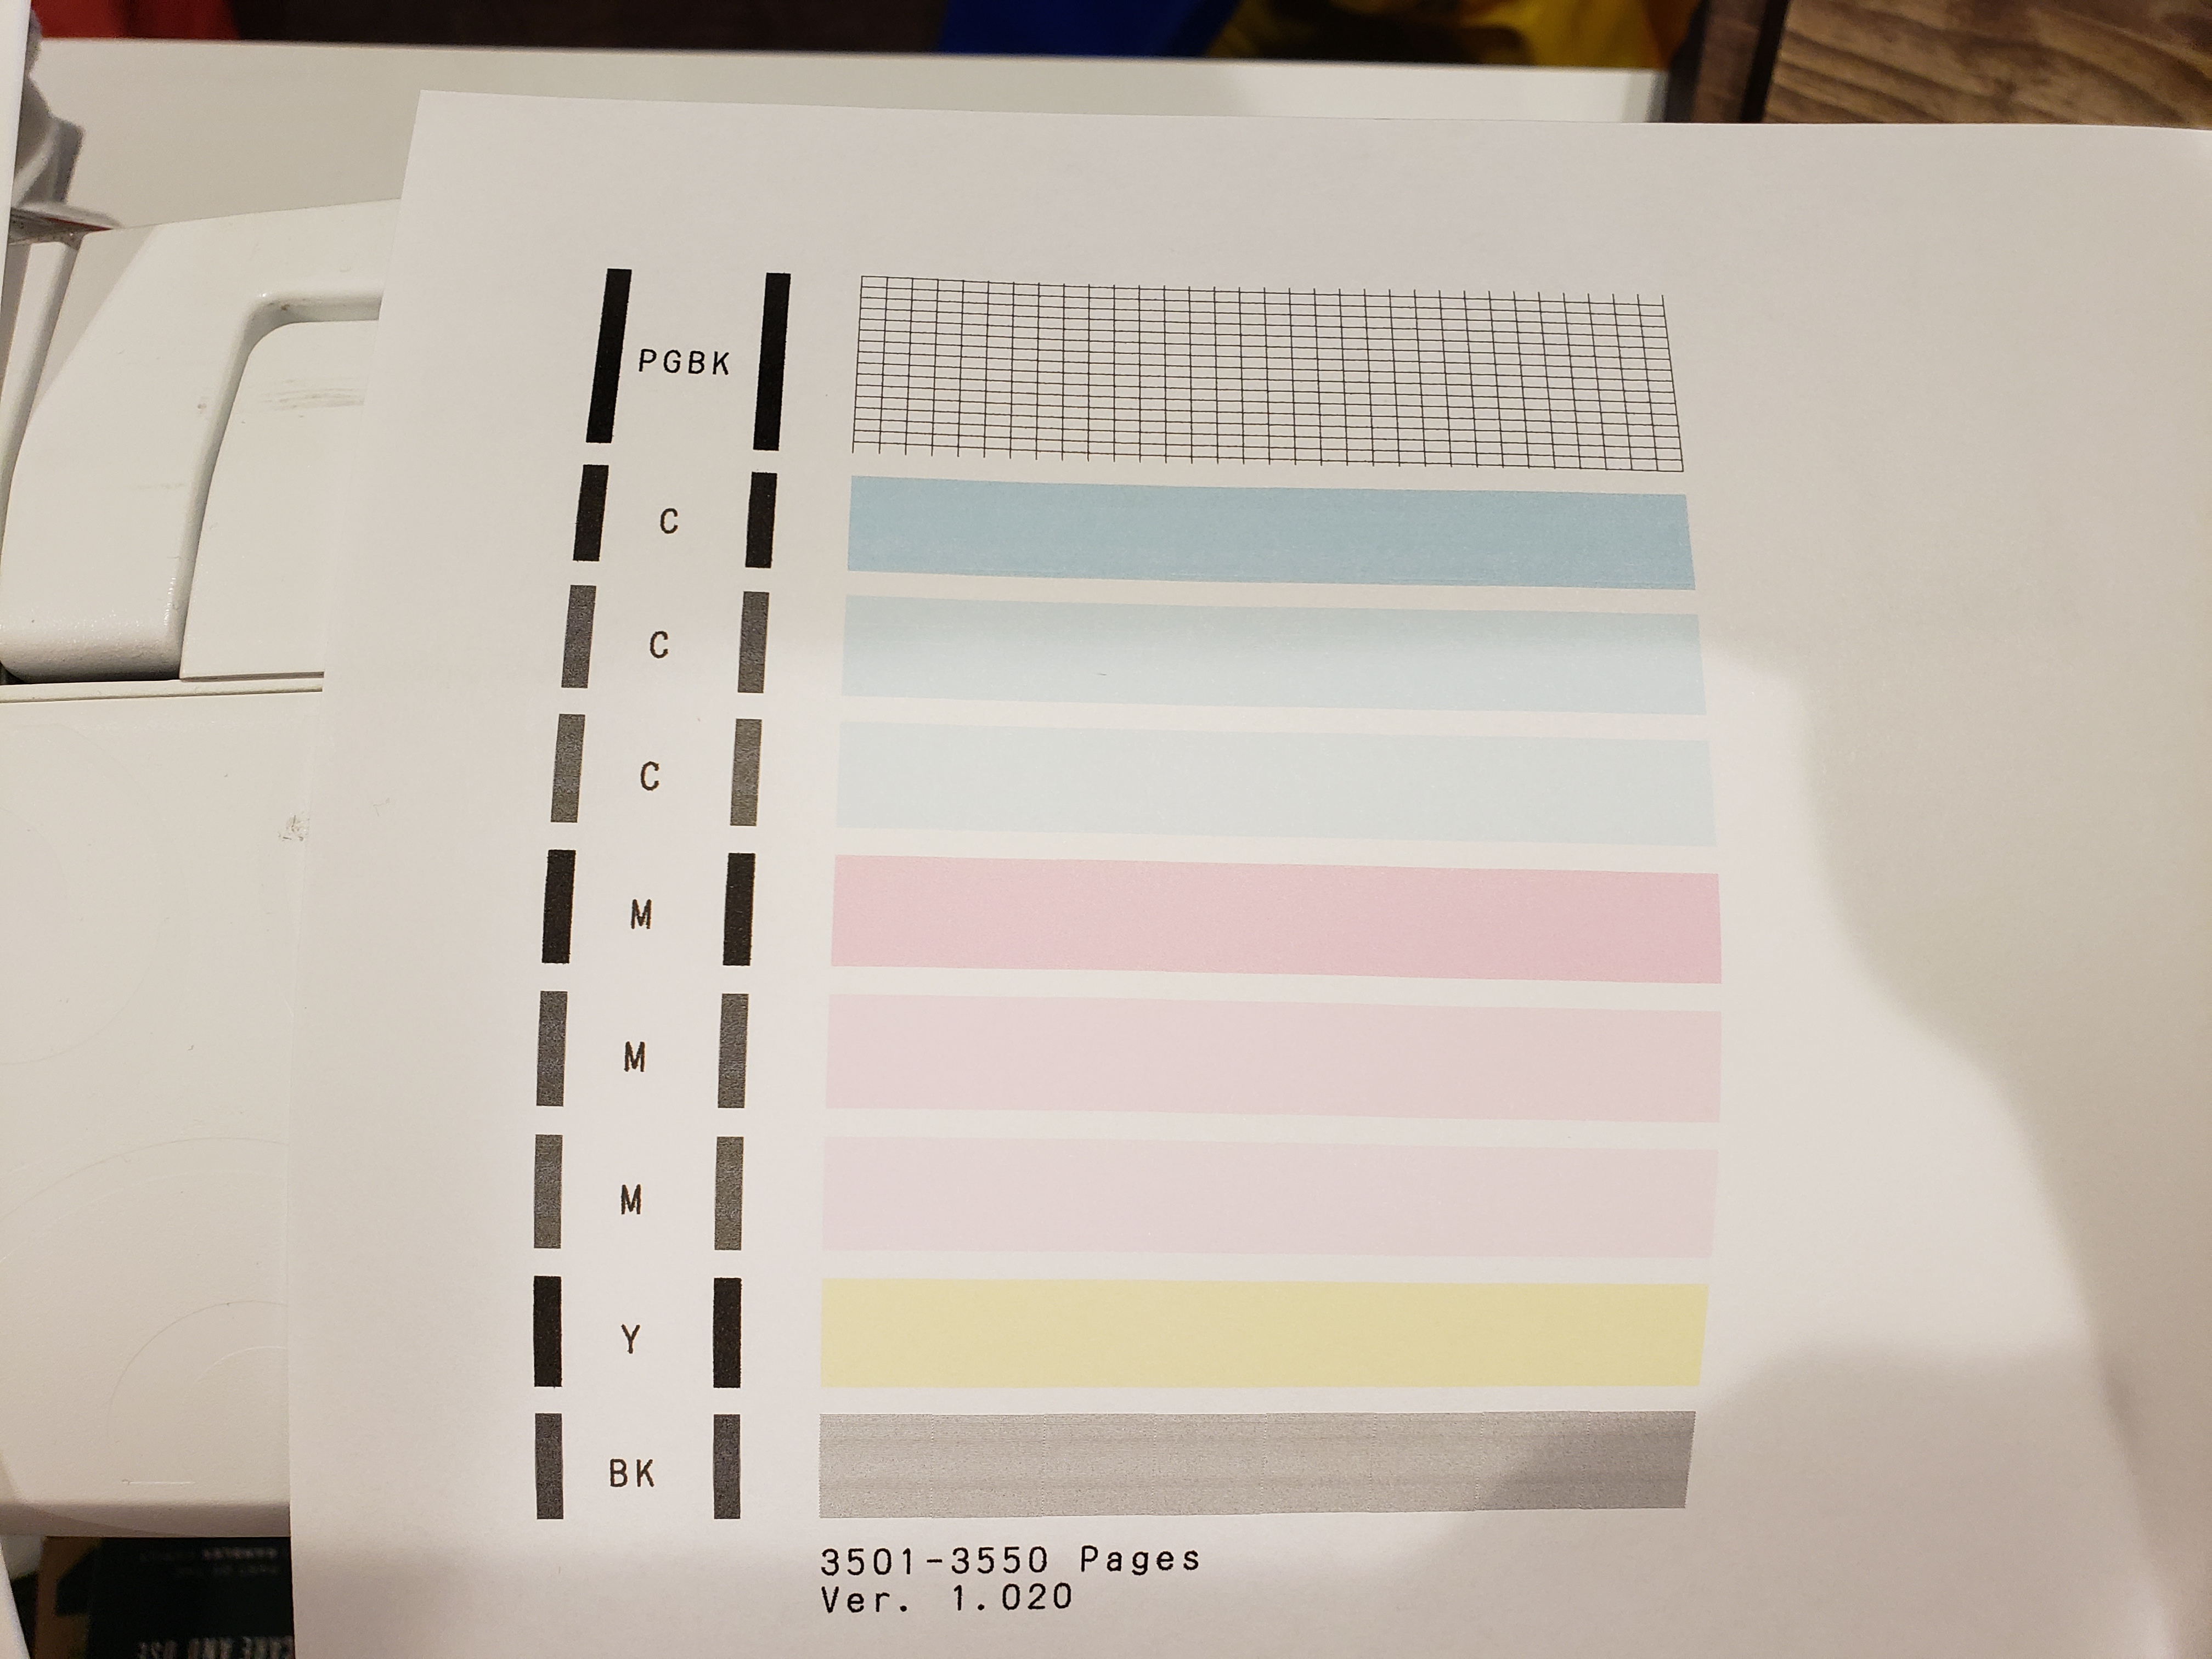 Pixma MX922 not printing correctly, colors are du... - Canon Community